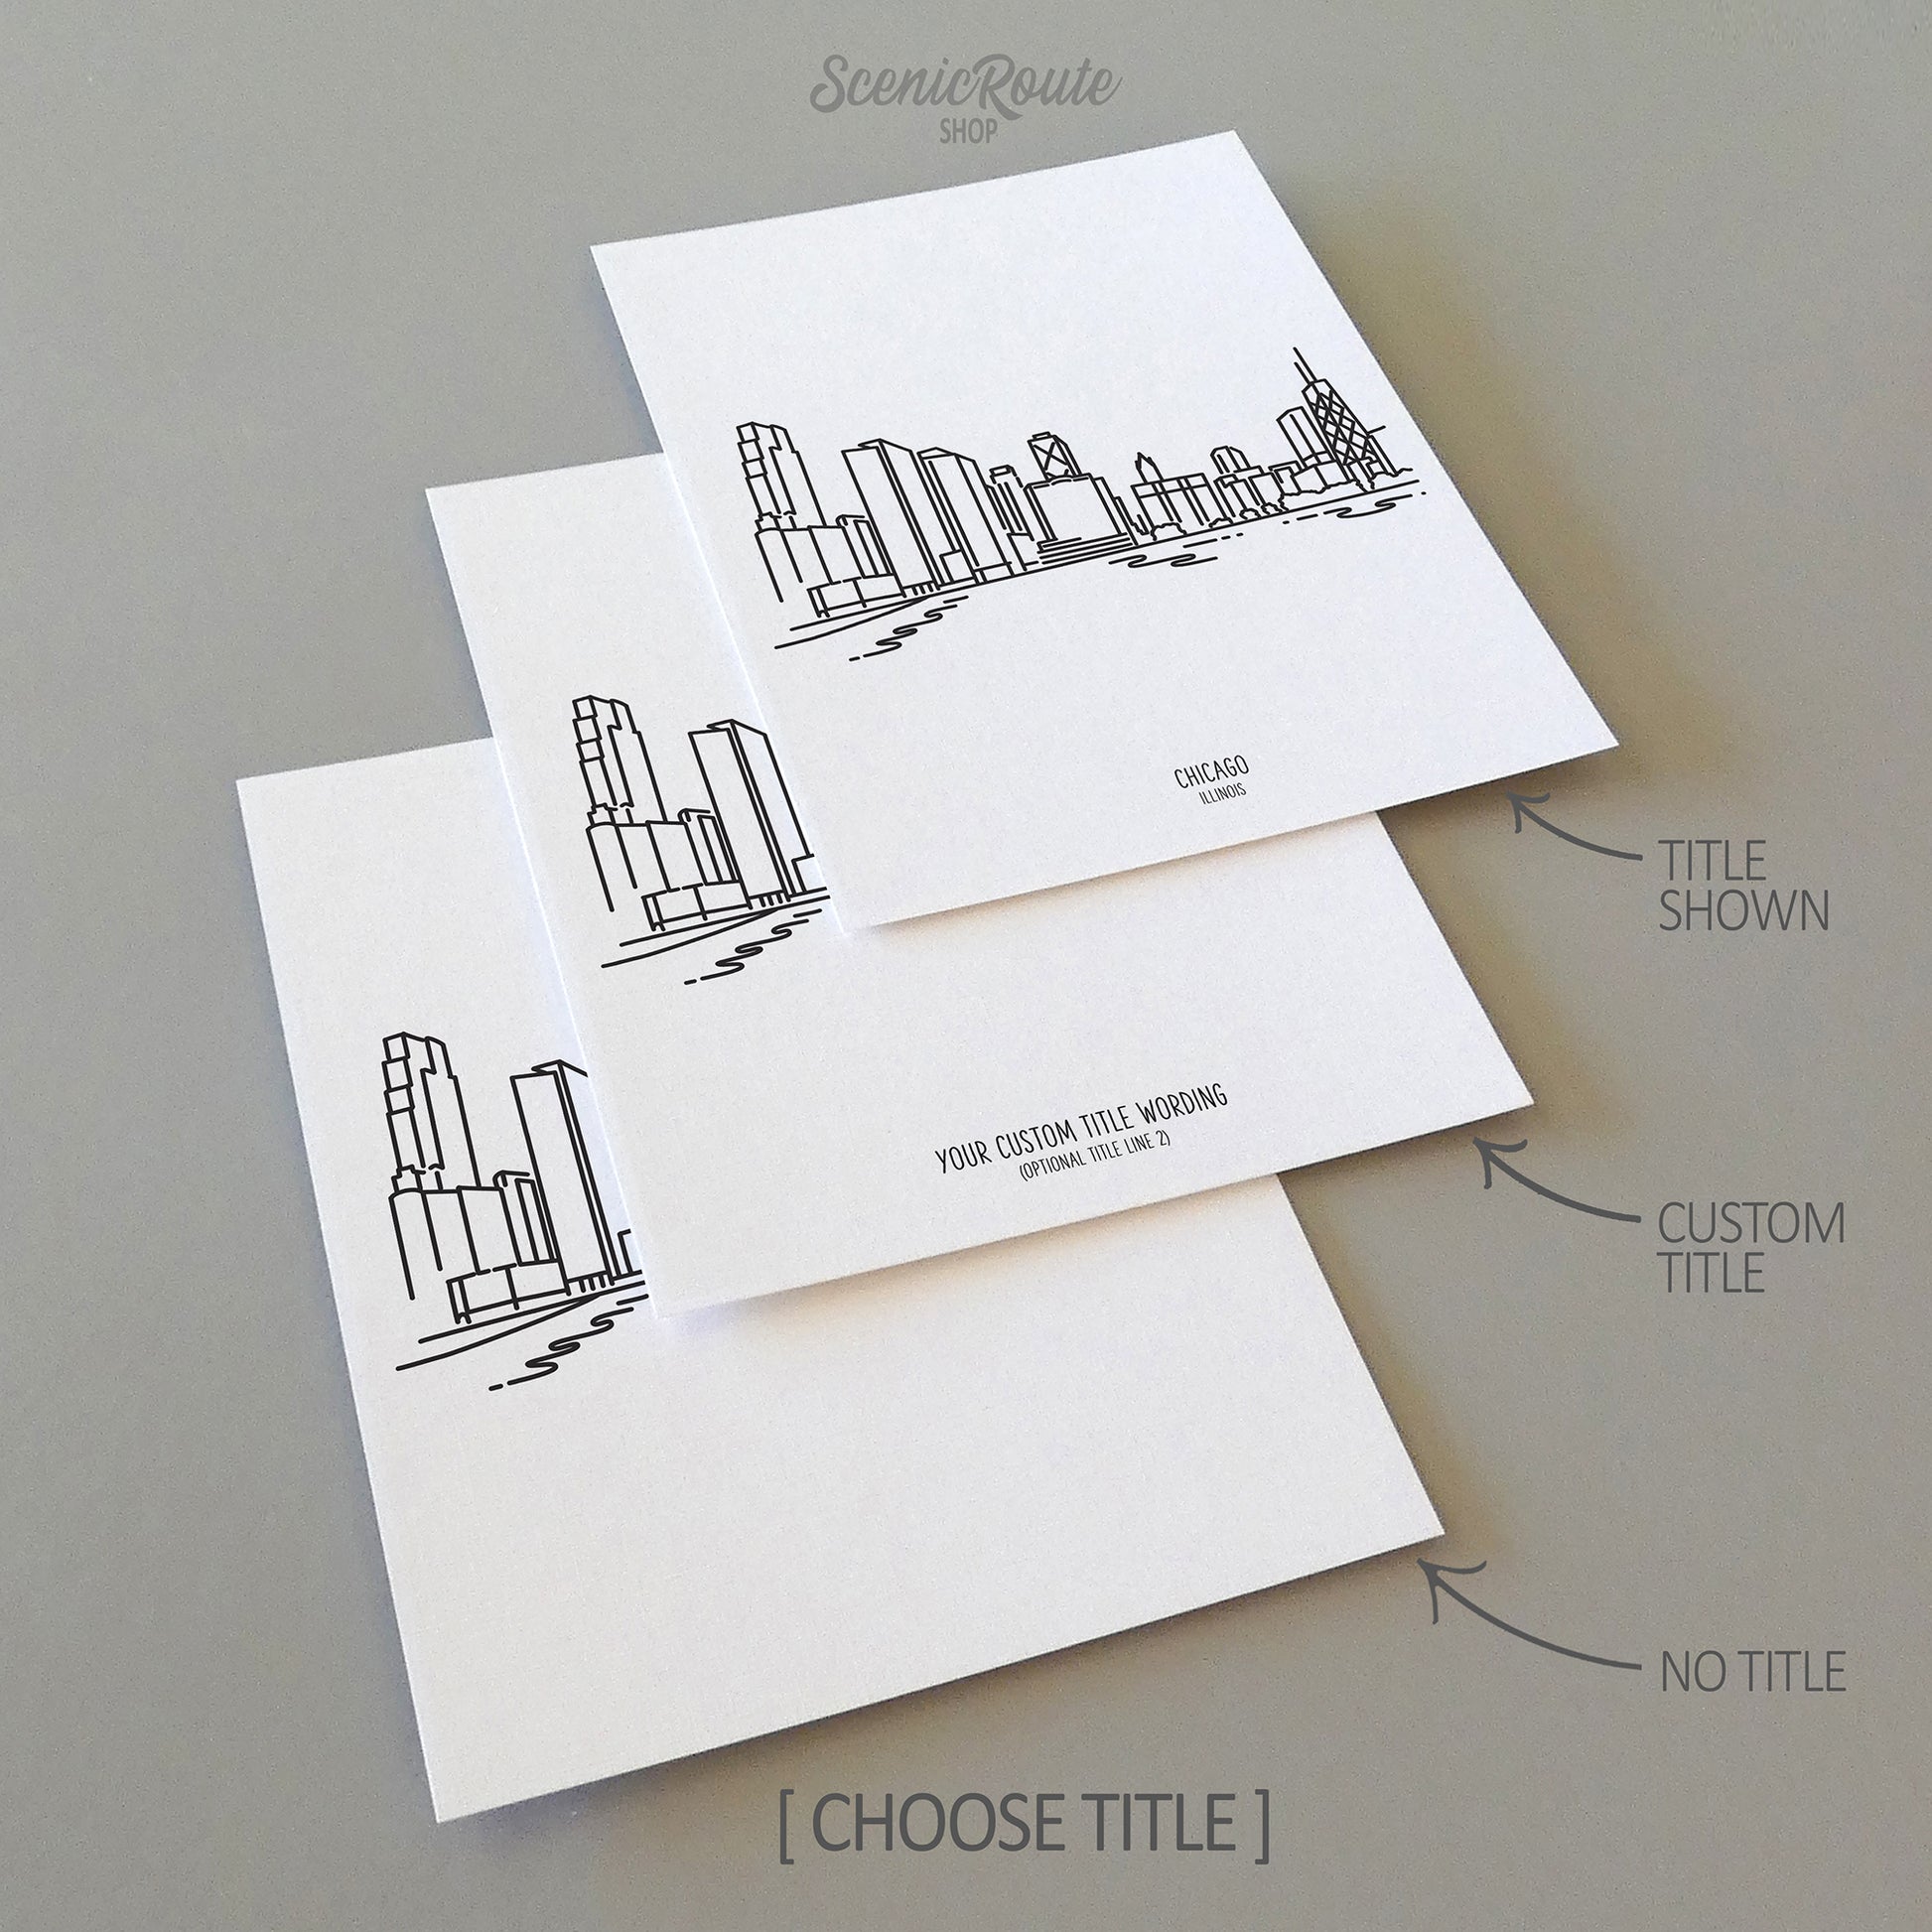 Three line art drawings of the Chicago Illinois Skyline on white linen paper with a gray background. The pieces are shown with title options that can be chosen and personalized.